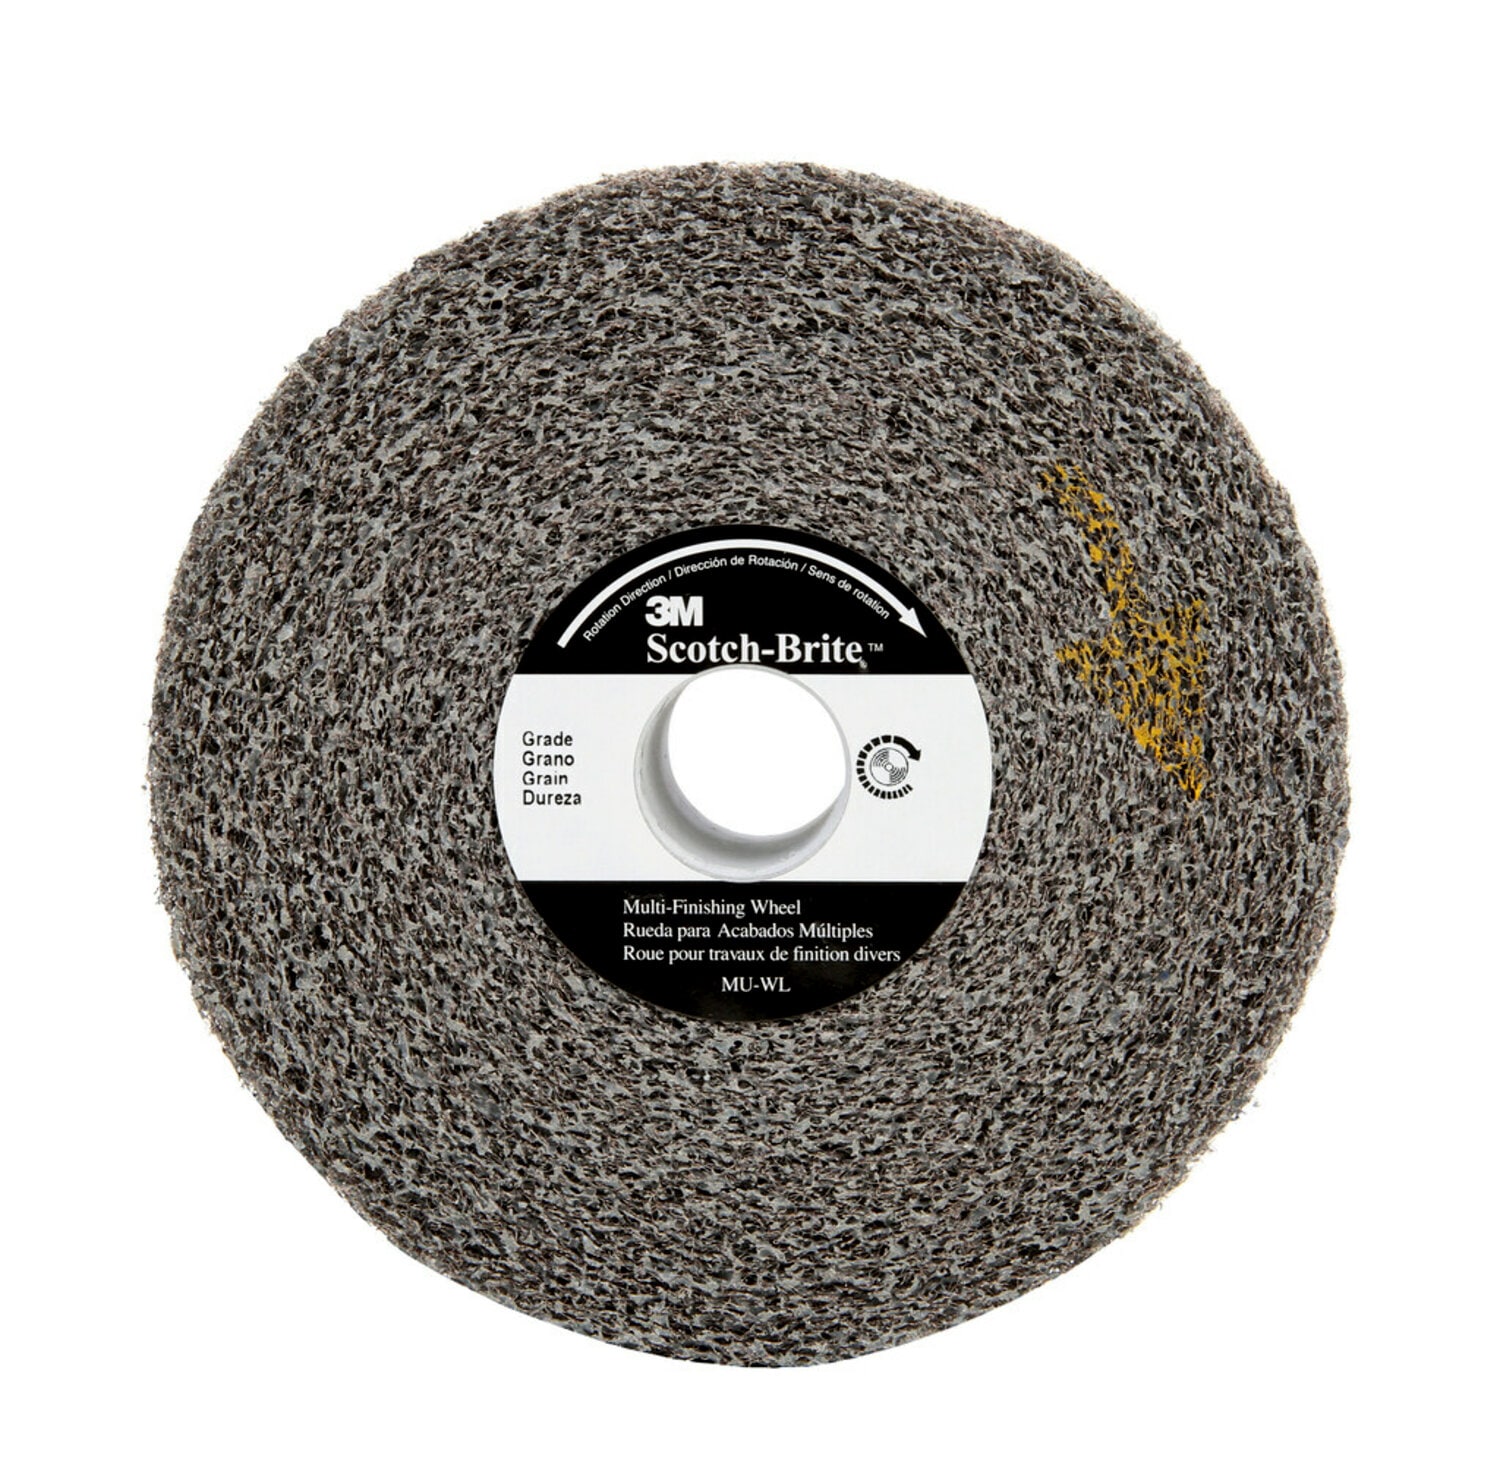 Custom colored nylon webbing Manufacturers and Suppliers - Free Sample in  Stock - Dyneema